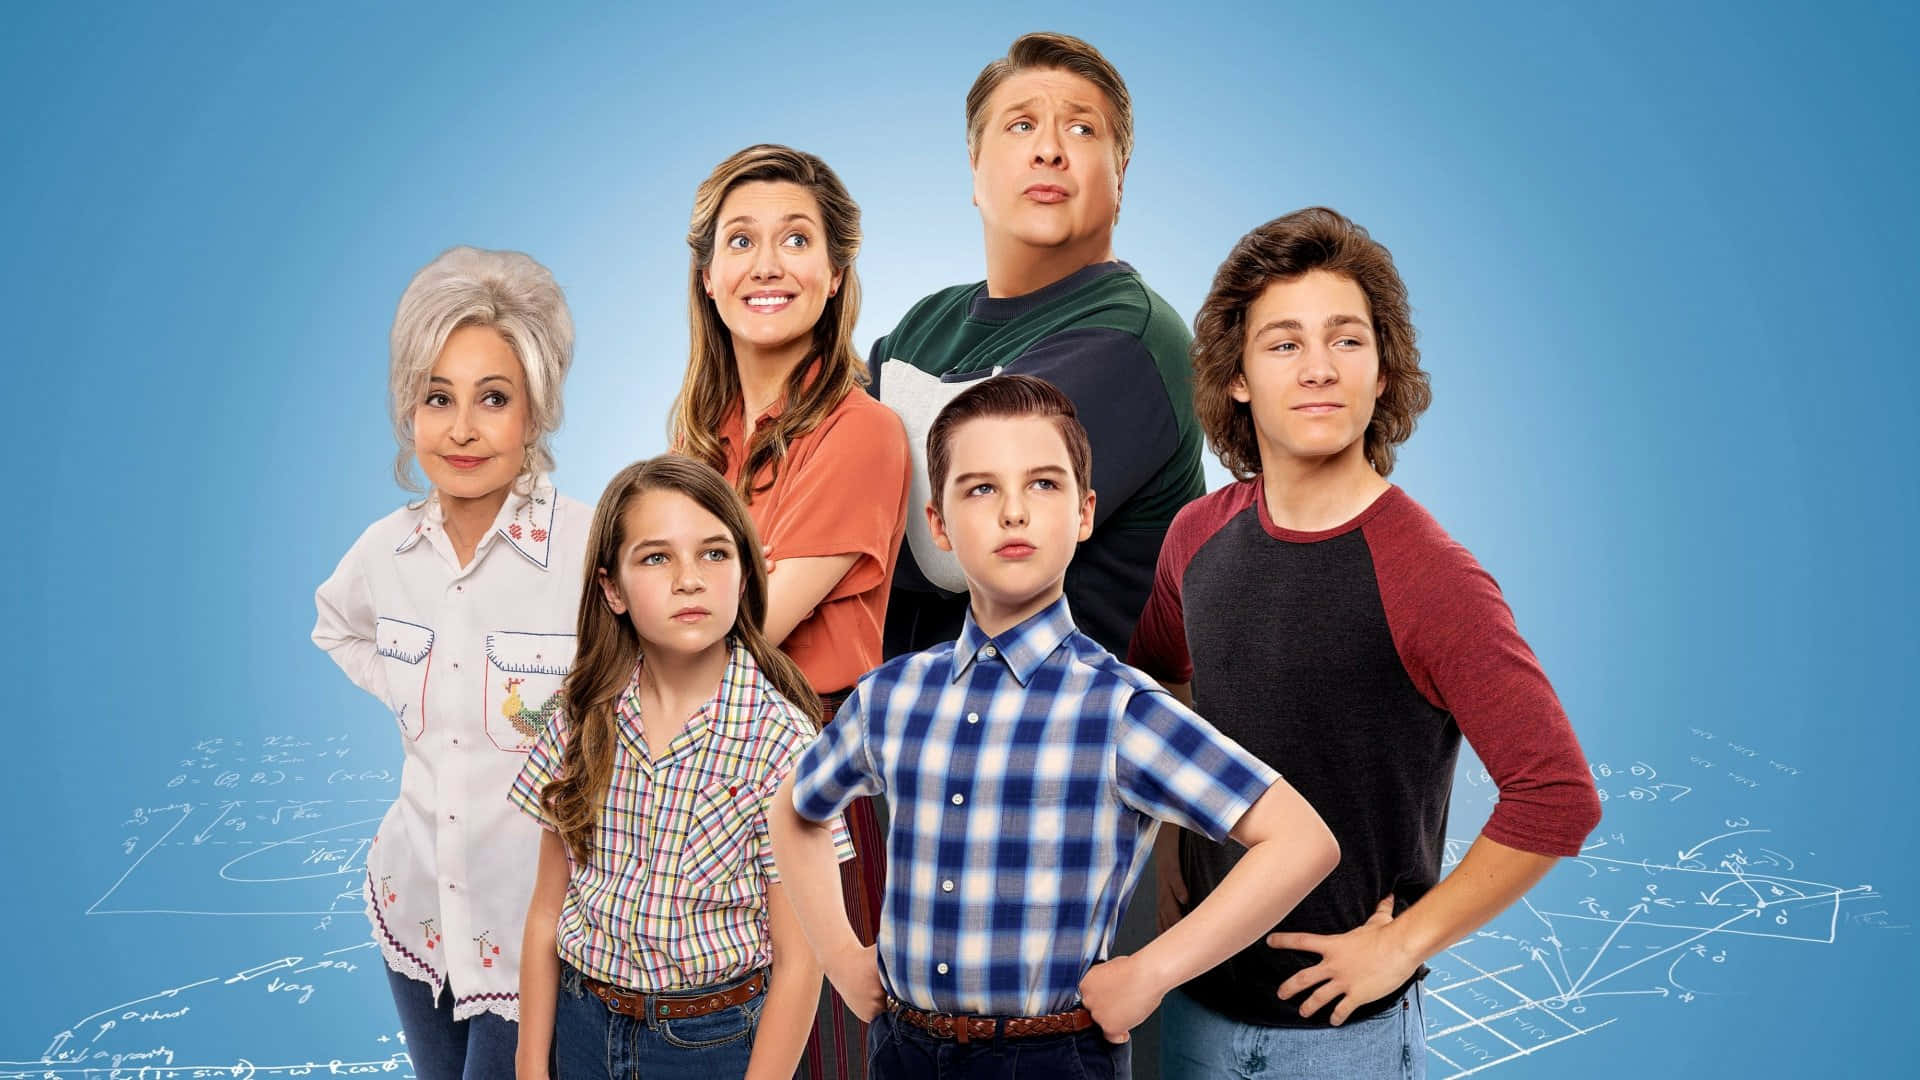 Young Sheldon Cast Promotional Photo Wallpaper